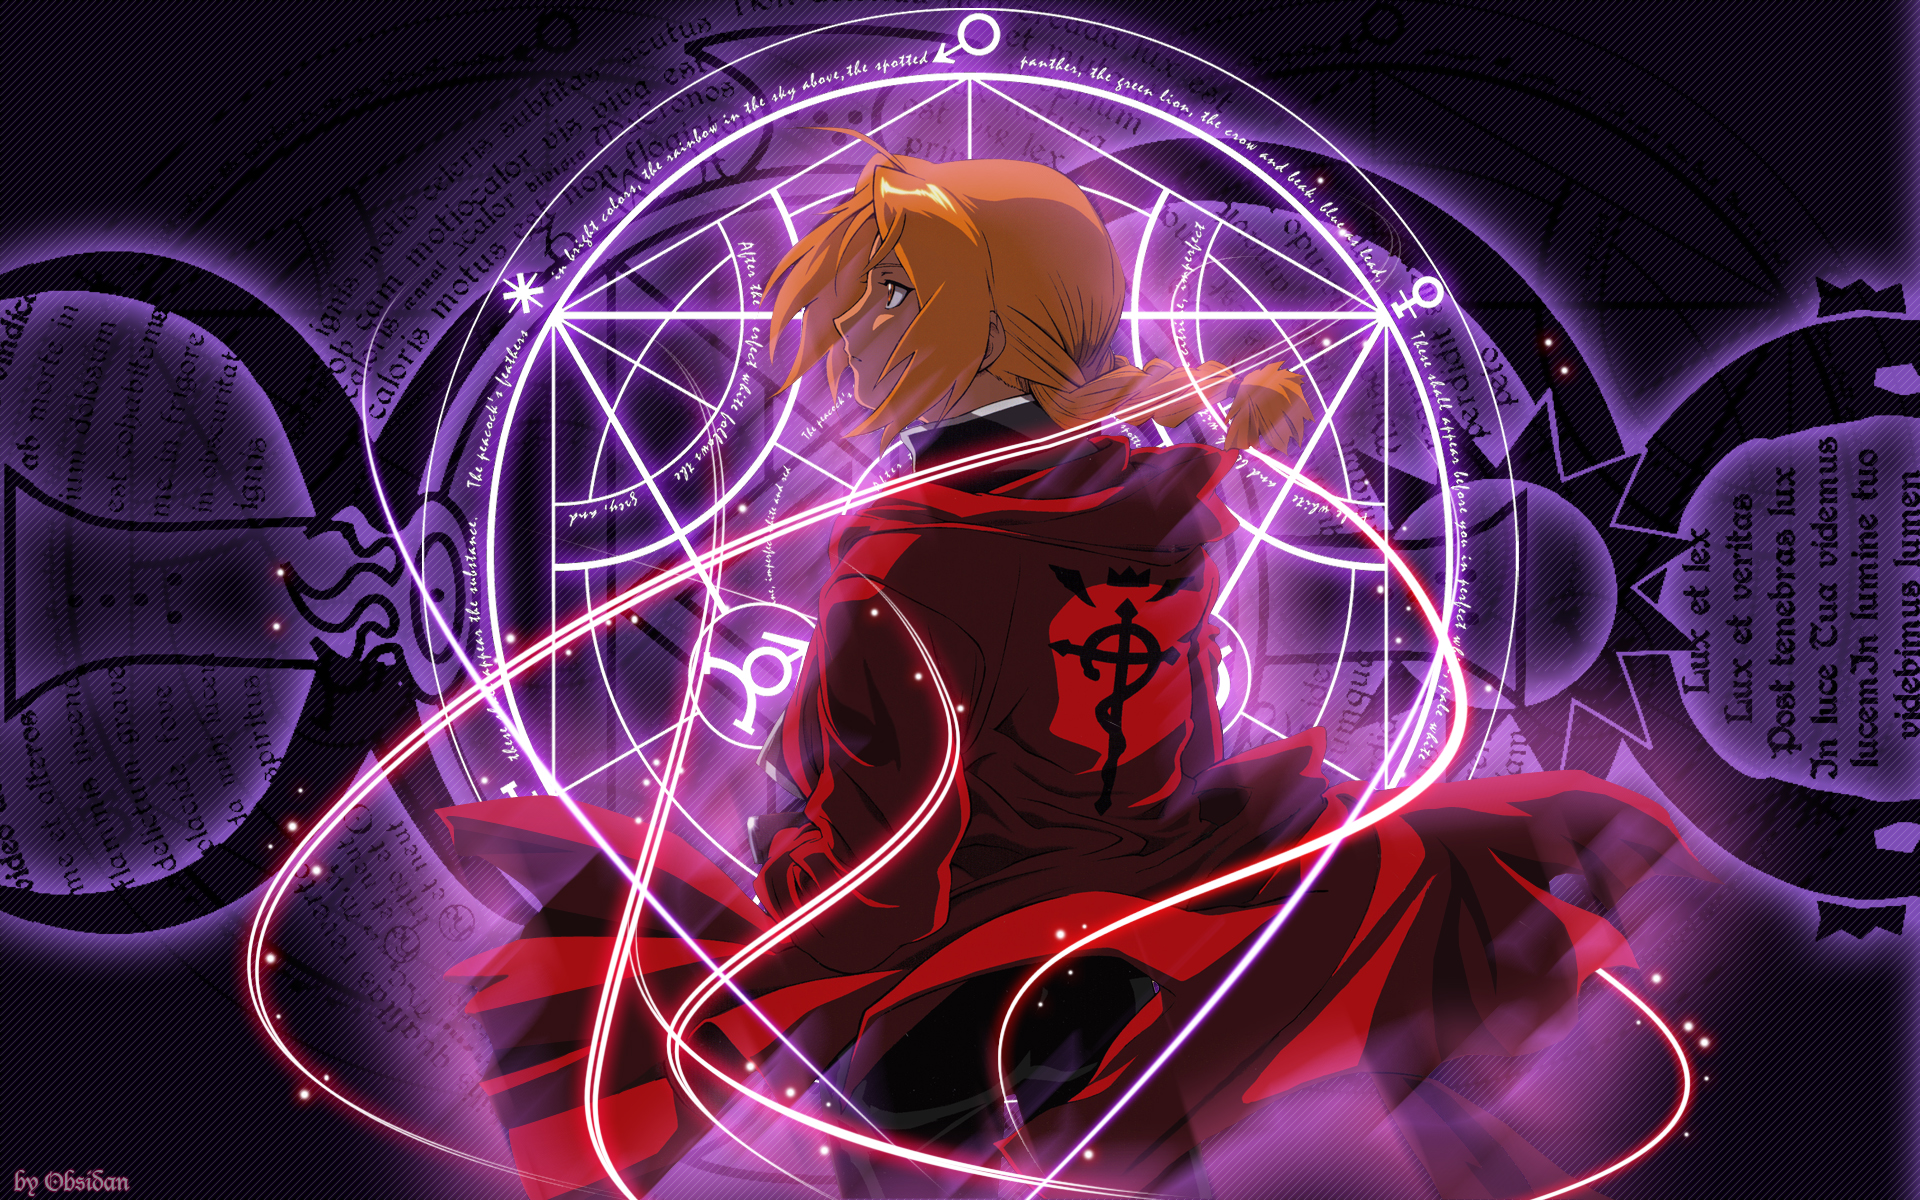 Free Download Full Metal Alchemist Wallpapers 299 1920x1200 For Images, Photos, Reviews